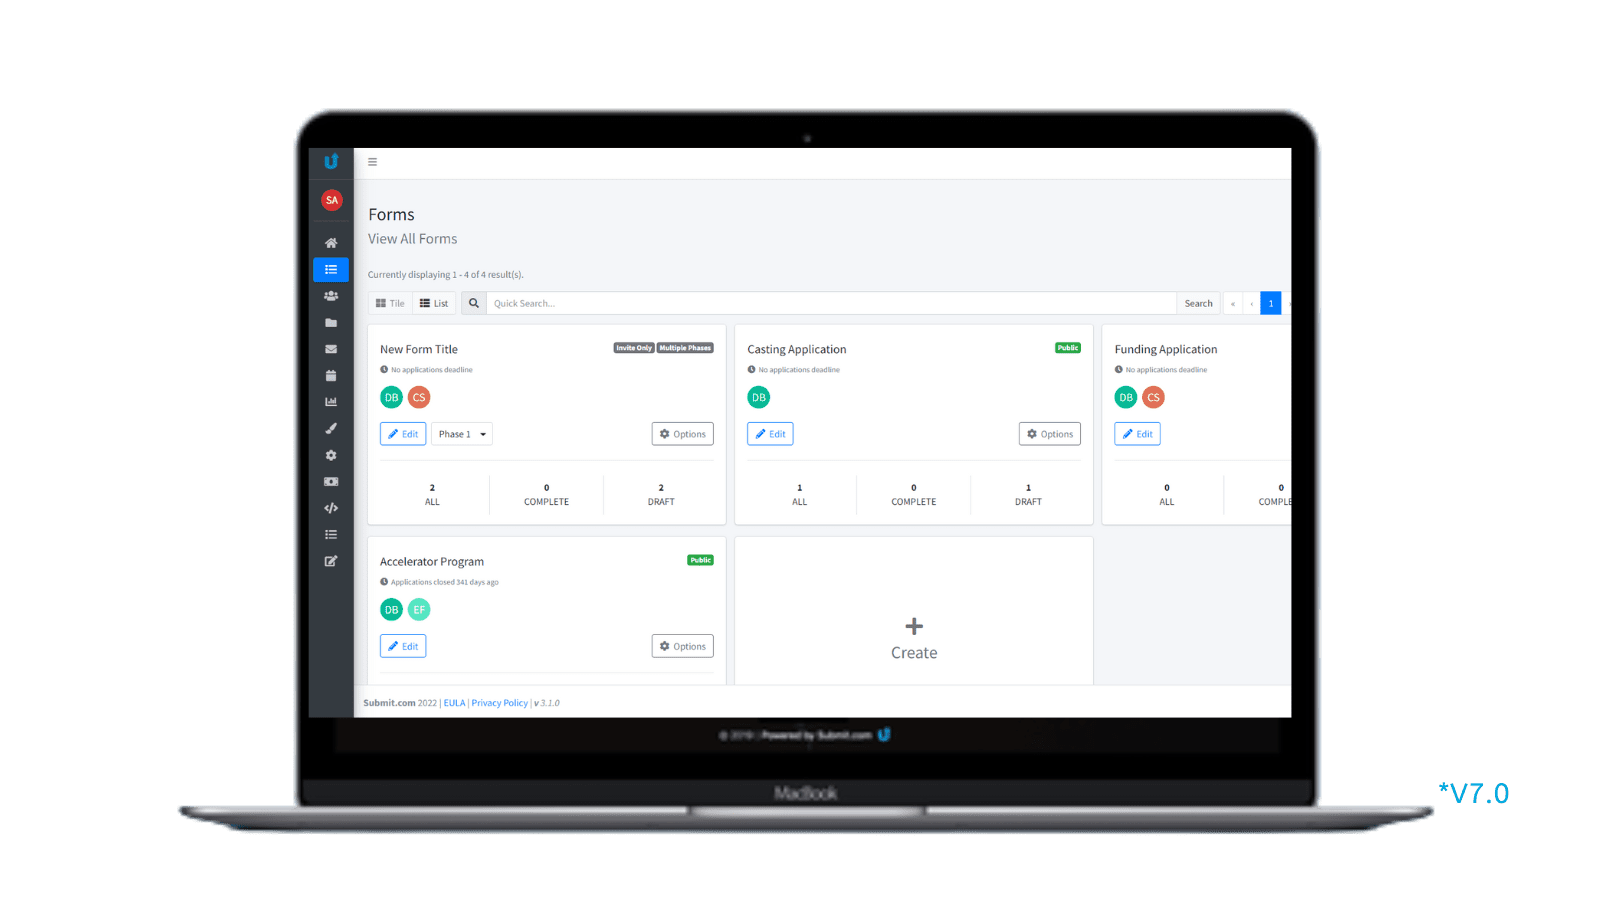 Submit.com’s software interface for data collection